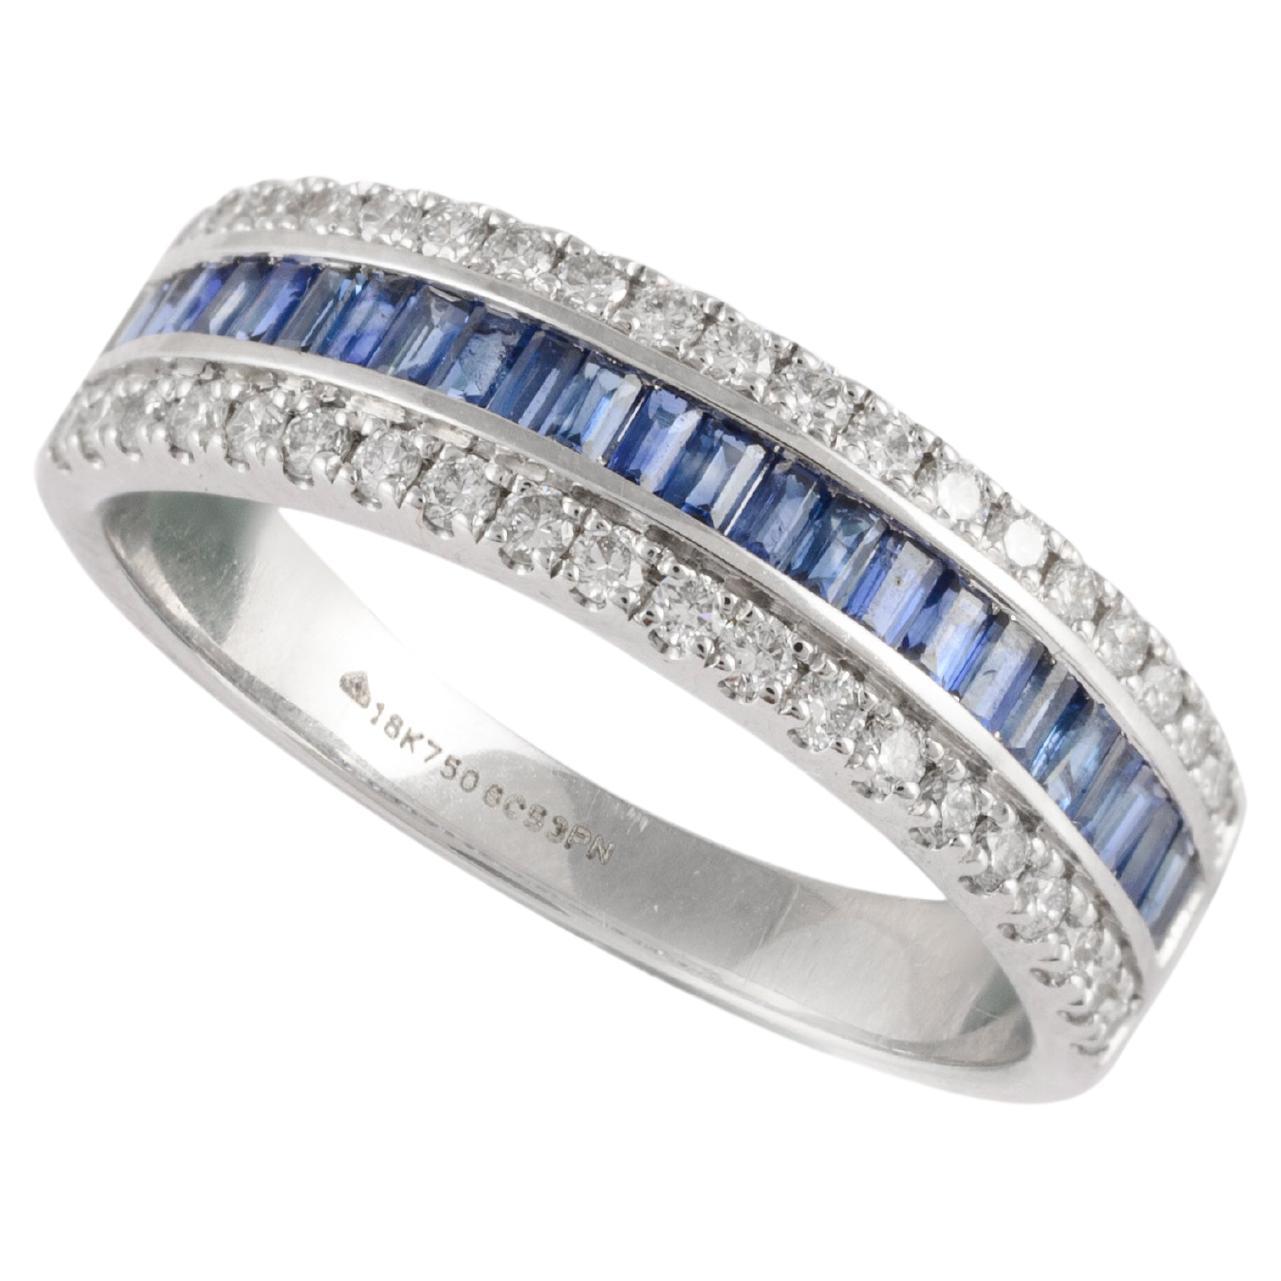 For Sale:  Natural Blue Sapphire Diamond Wedding Ring Crafted in 18k Solid White Gold